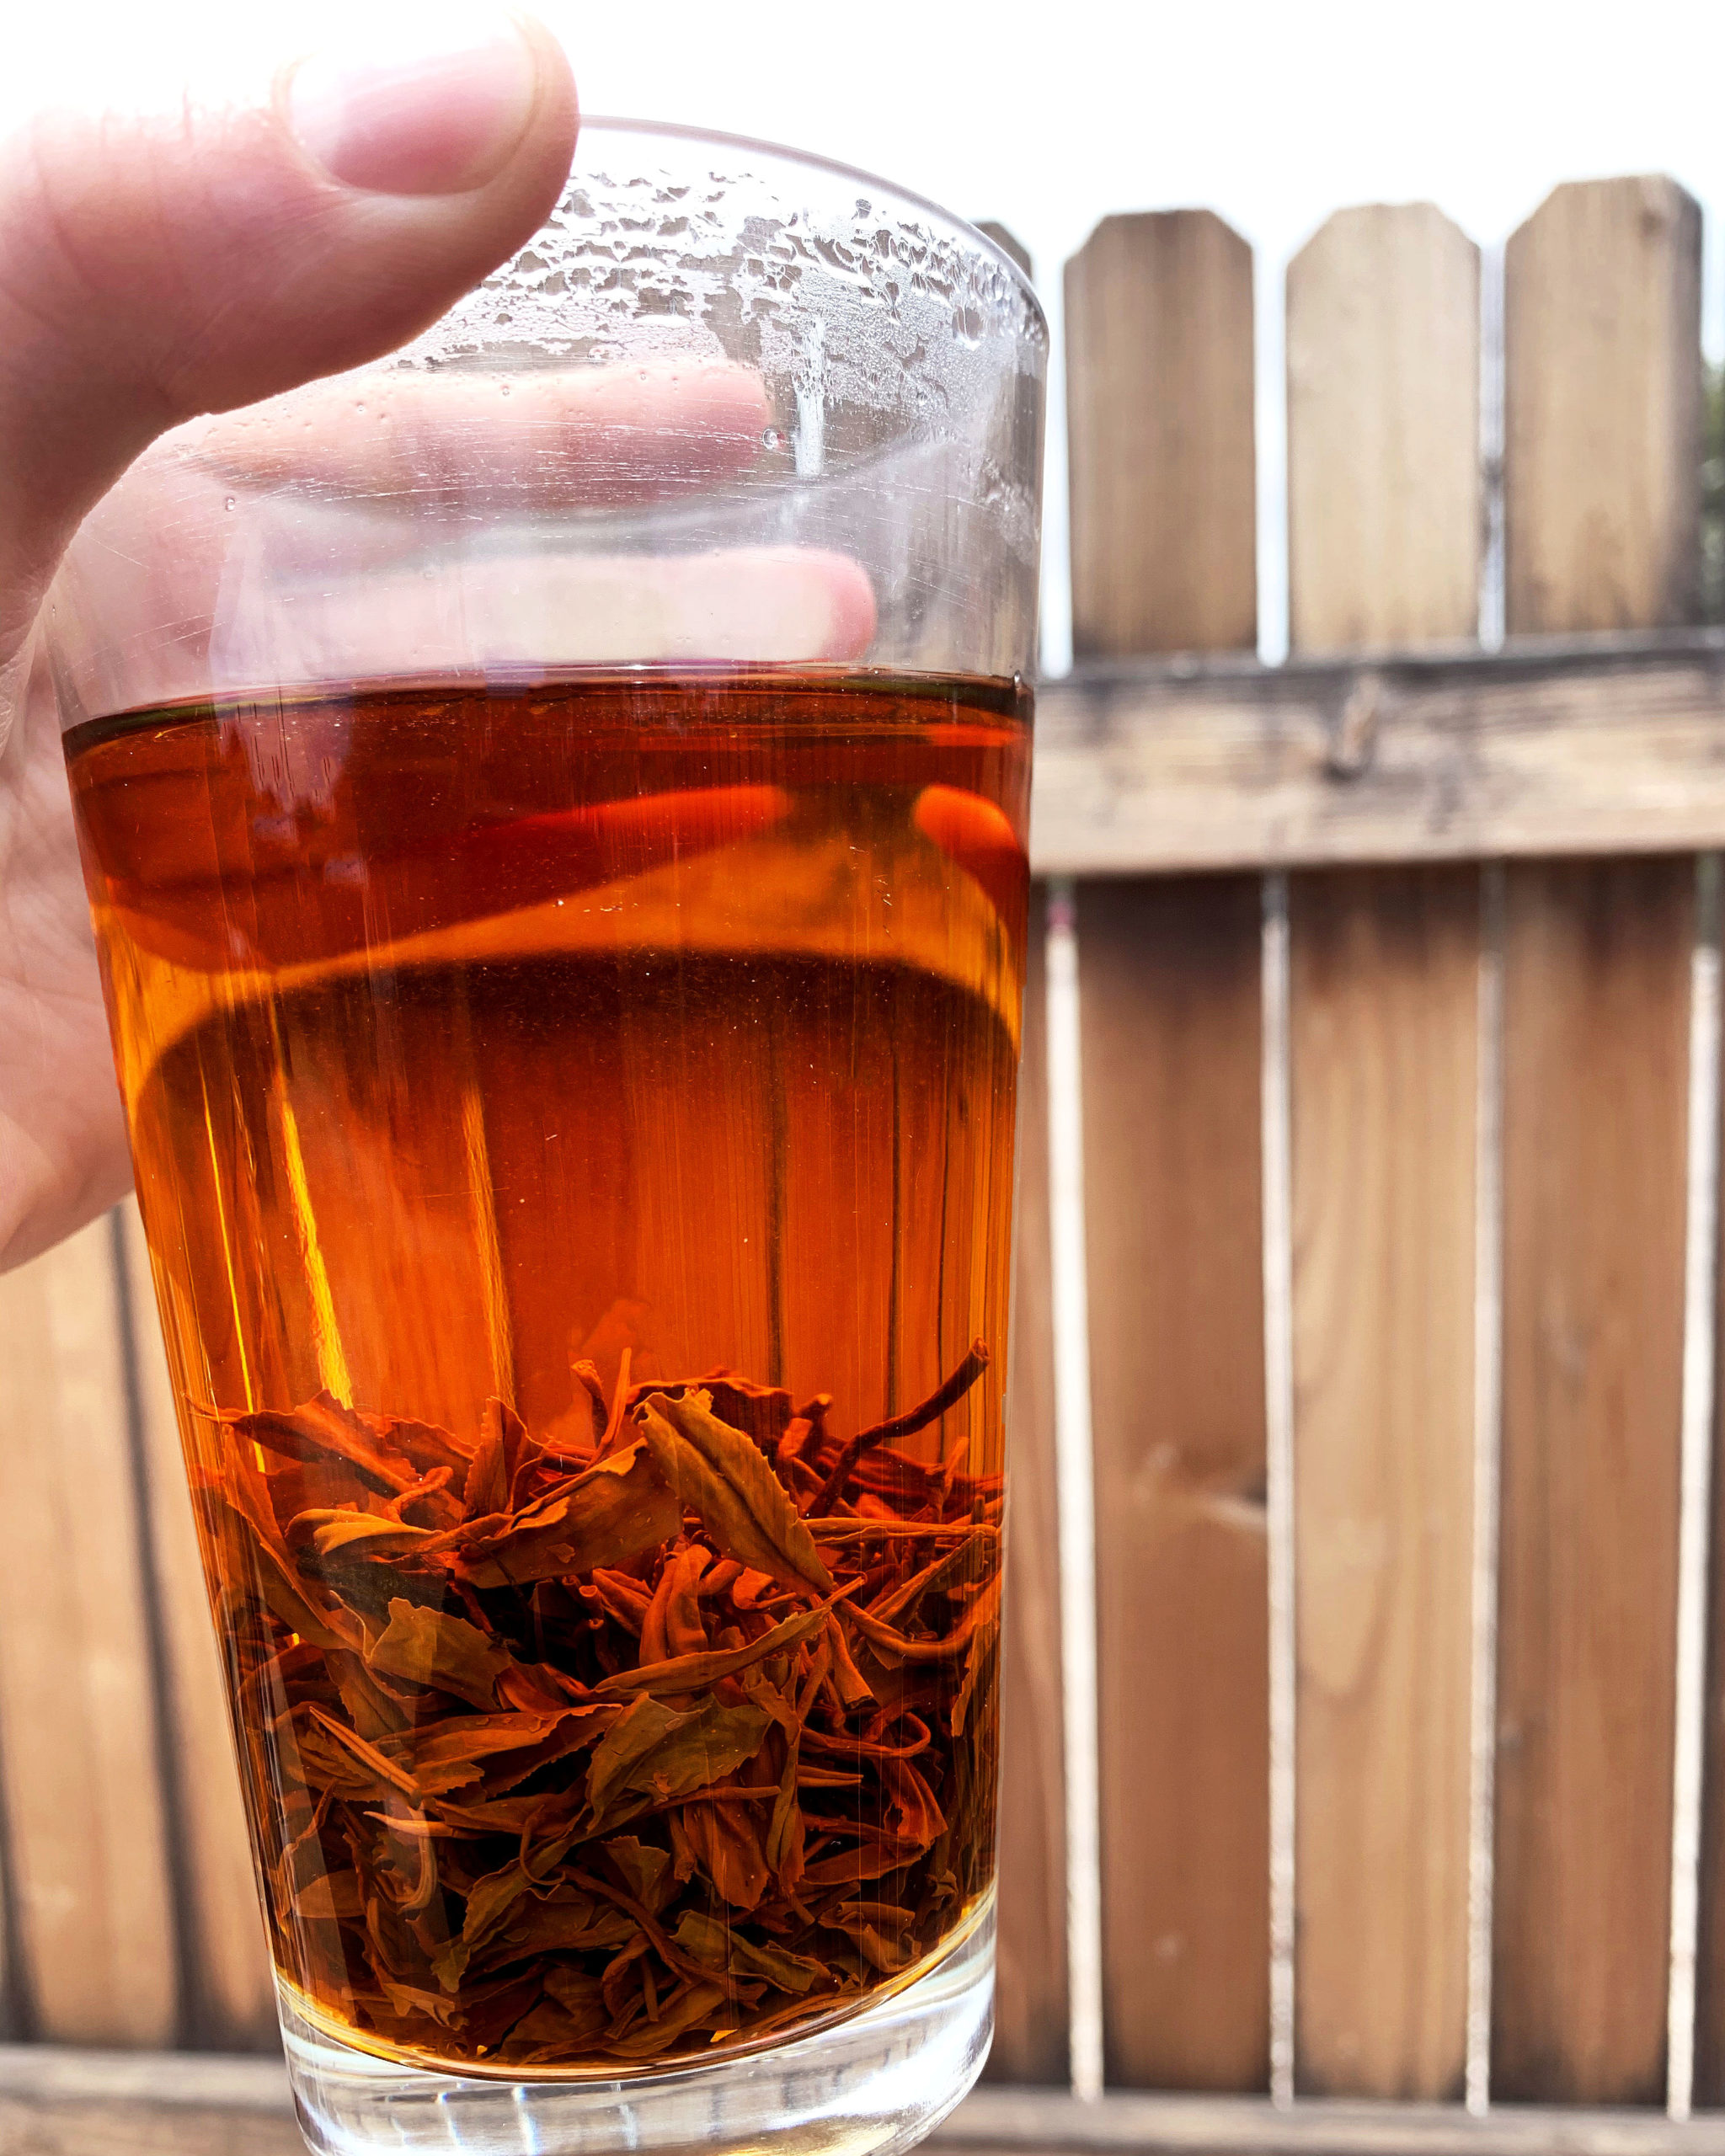 Holding a pint glass full of black tea up against a rustic wooden fence. The saturated leaves fill the bottom third of the cup.